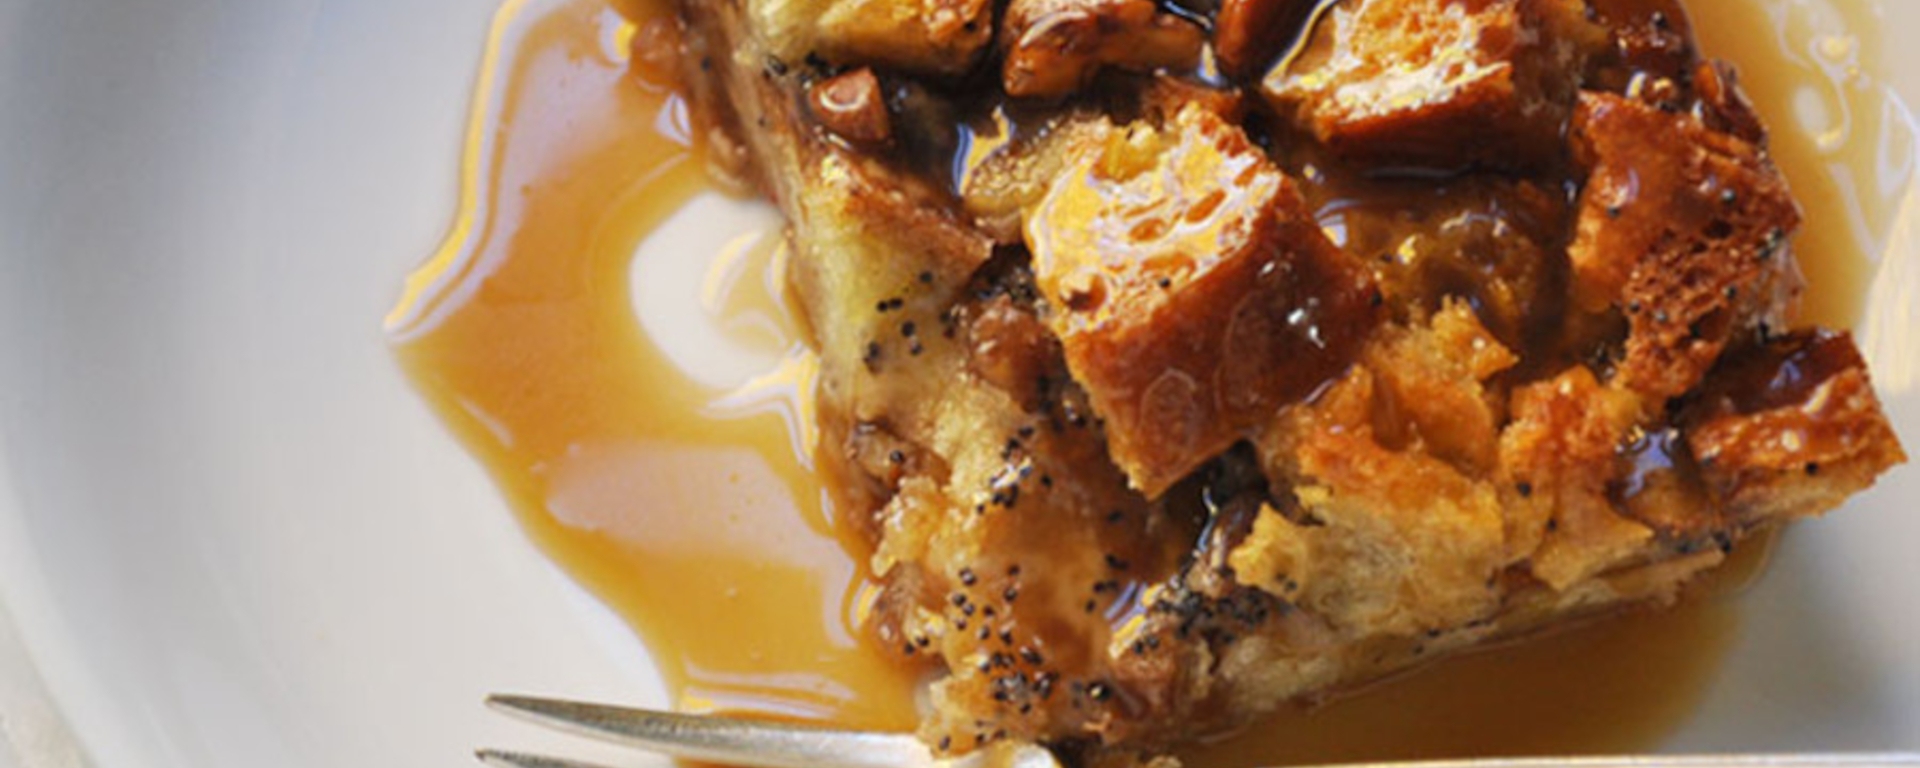 Gingerbread Spiced Bread Pudding With Bourbon Sauce